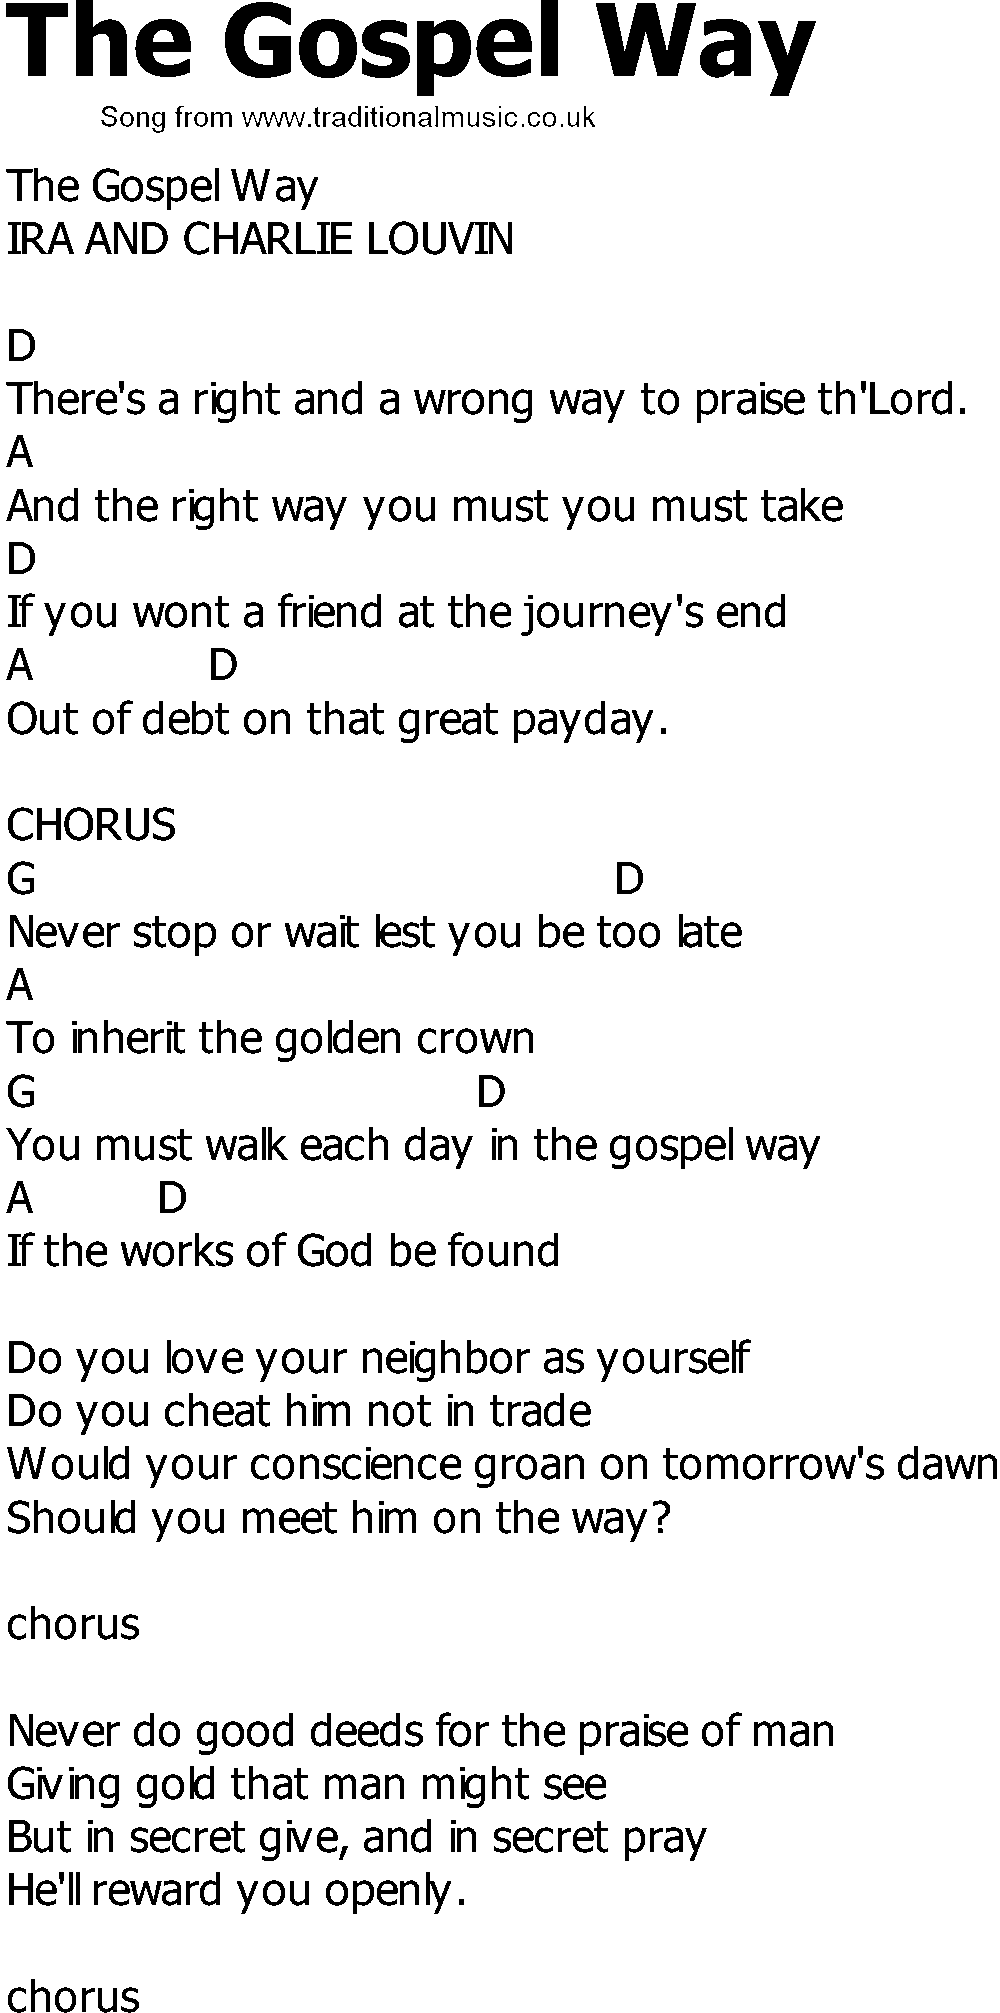 Old Country song lyrics with chords - The Gospel Way